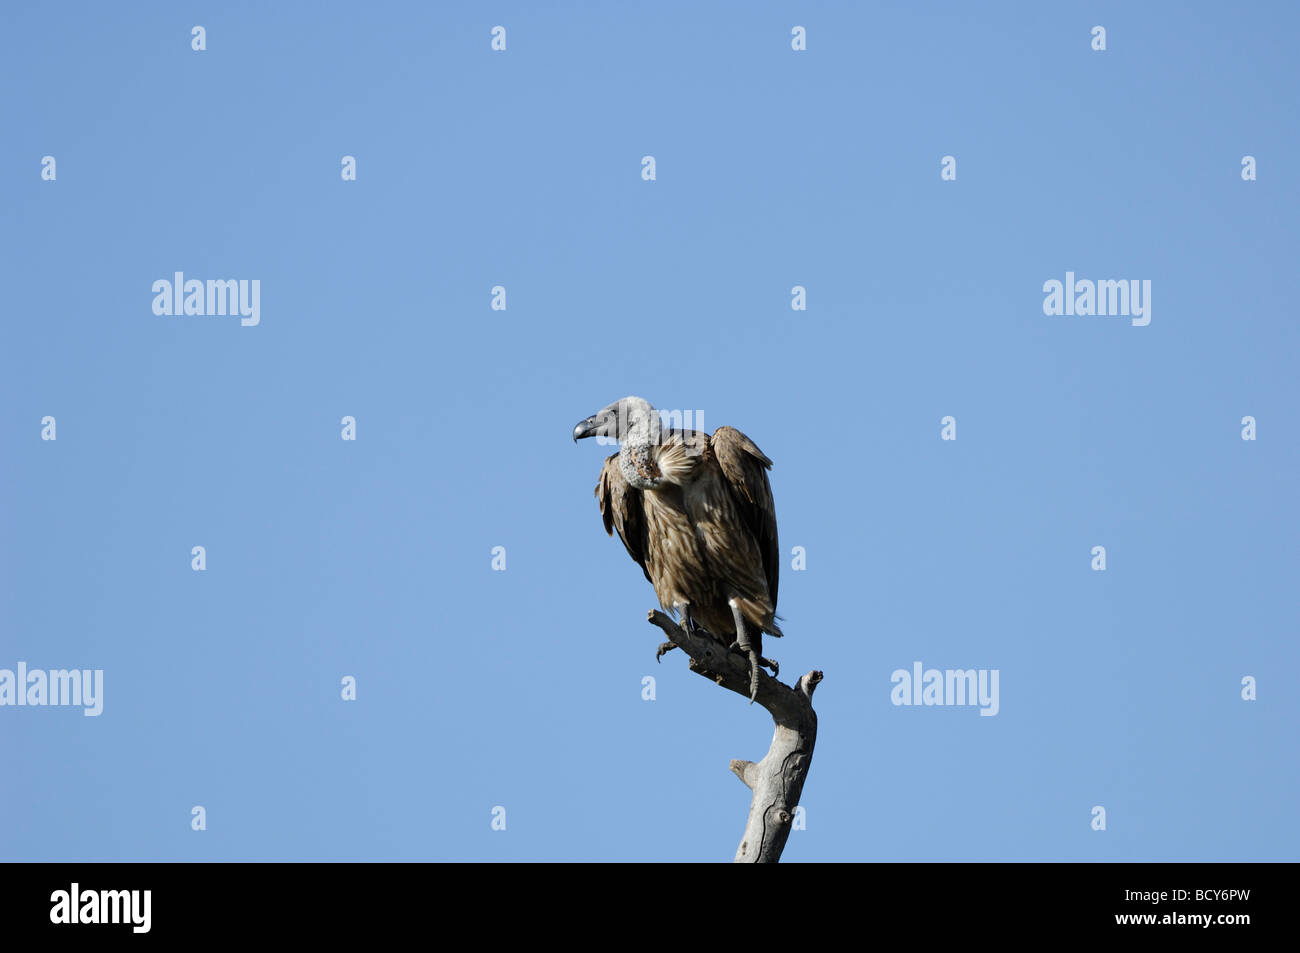 Stock photo of a white-backed vulture sitting on the top of a snag, Ndutu, Tanzania, February 2009. Stock Photo